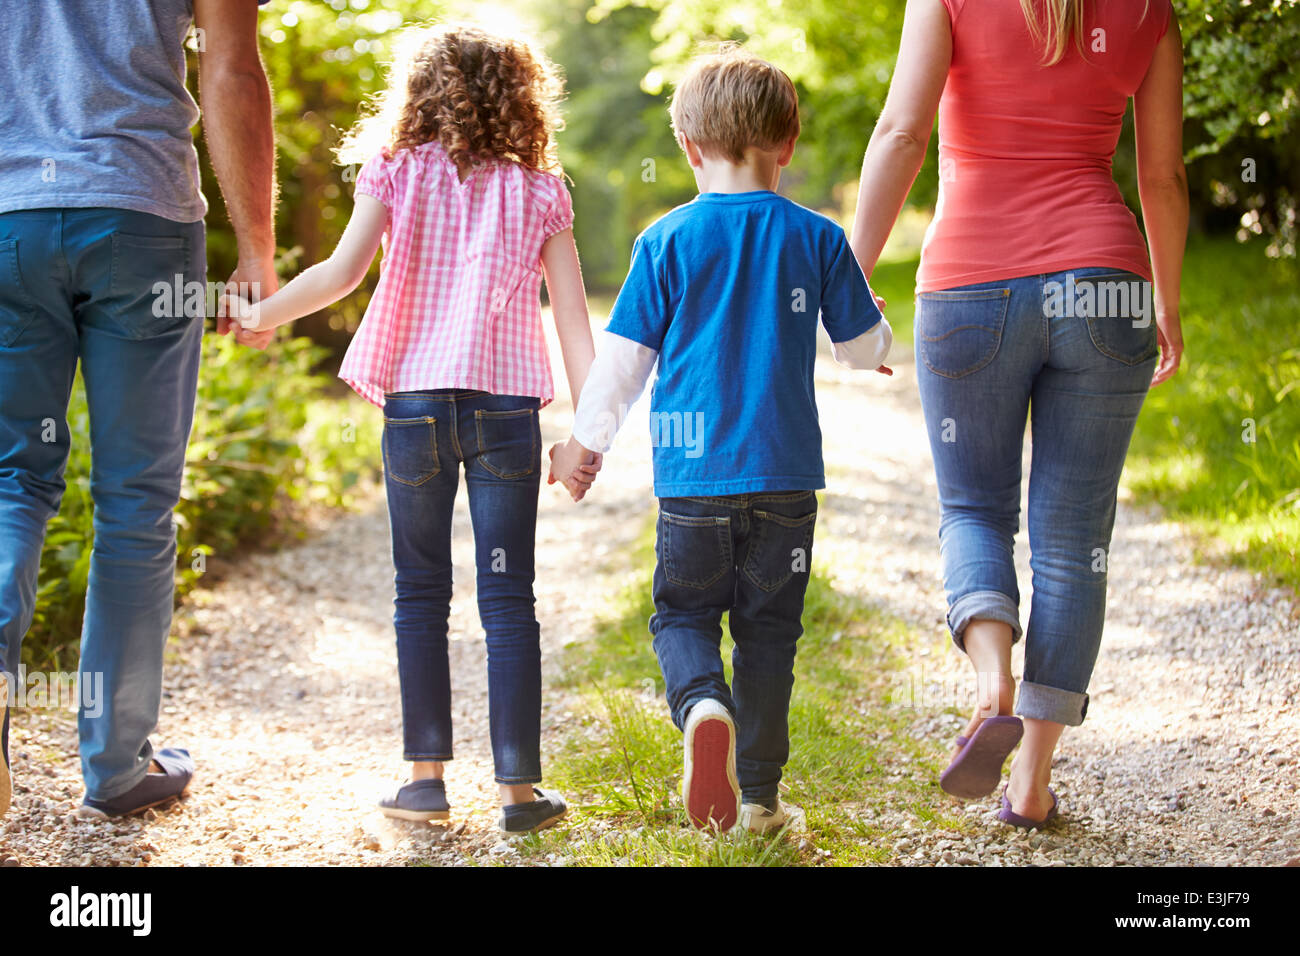 Rear View Of Family Walking In Countryside Stock Photo